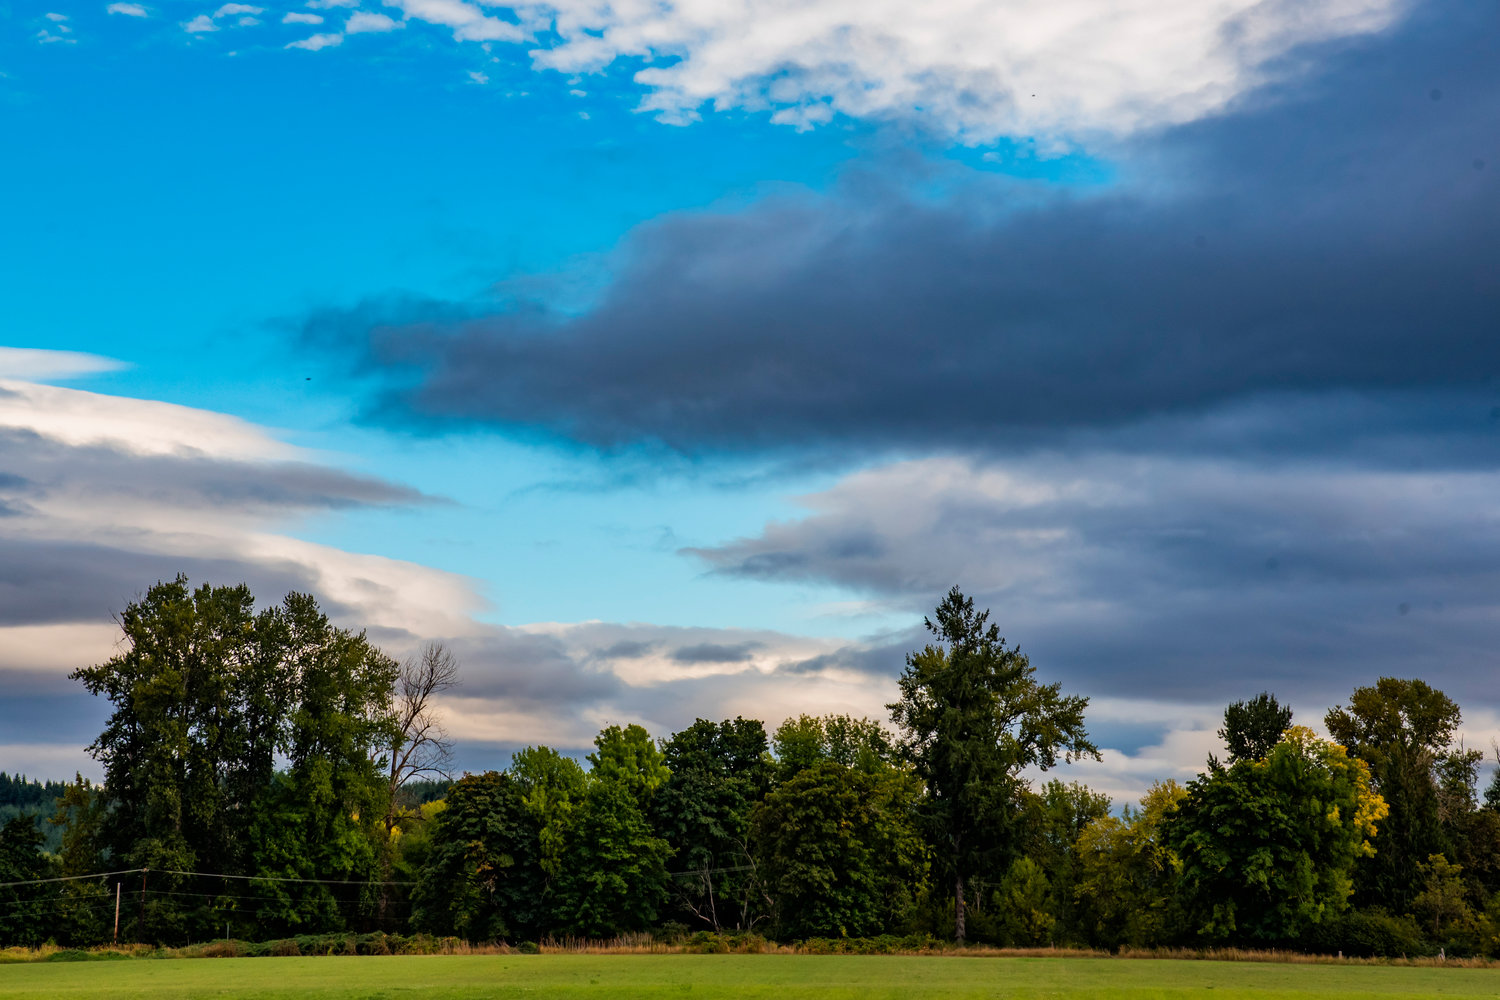 Dark clouds roll into blue skies over Chehalis in September.